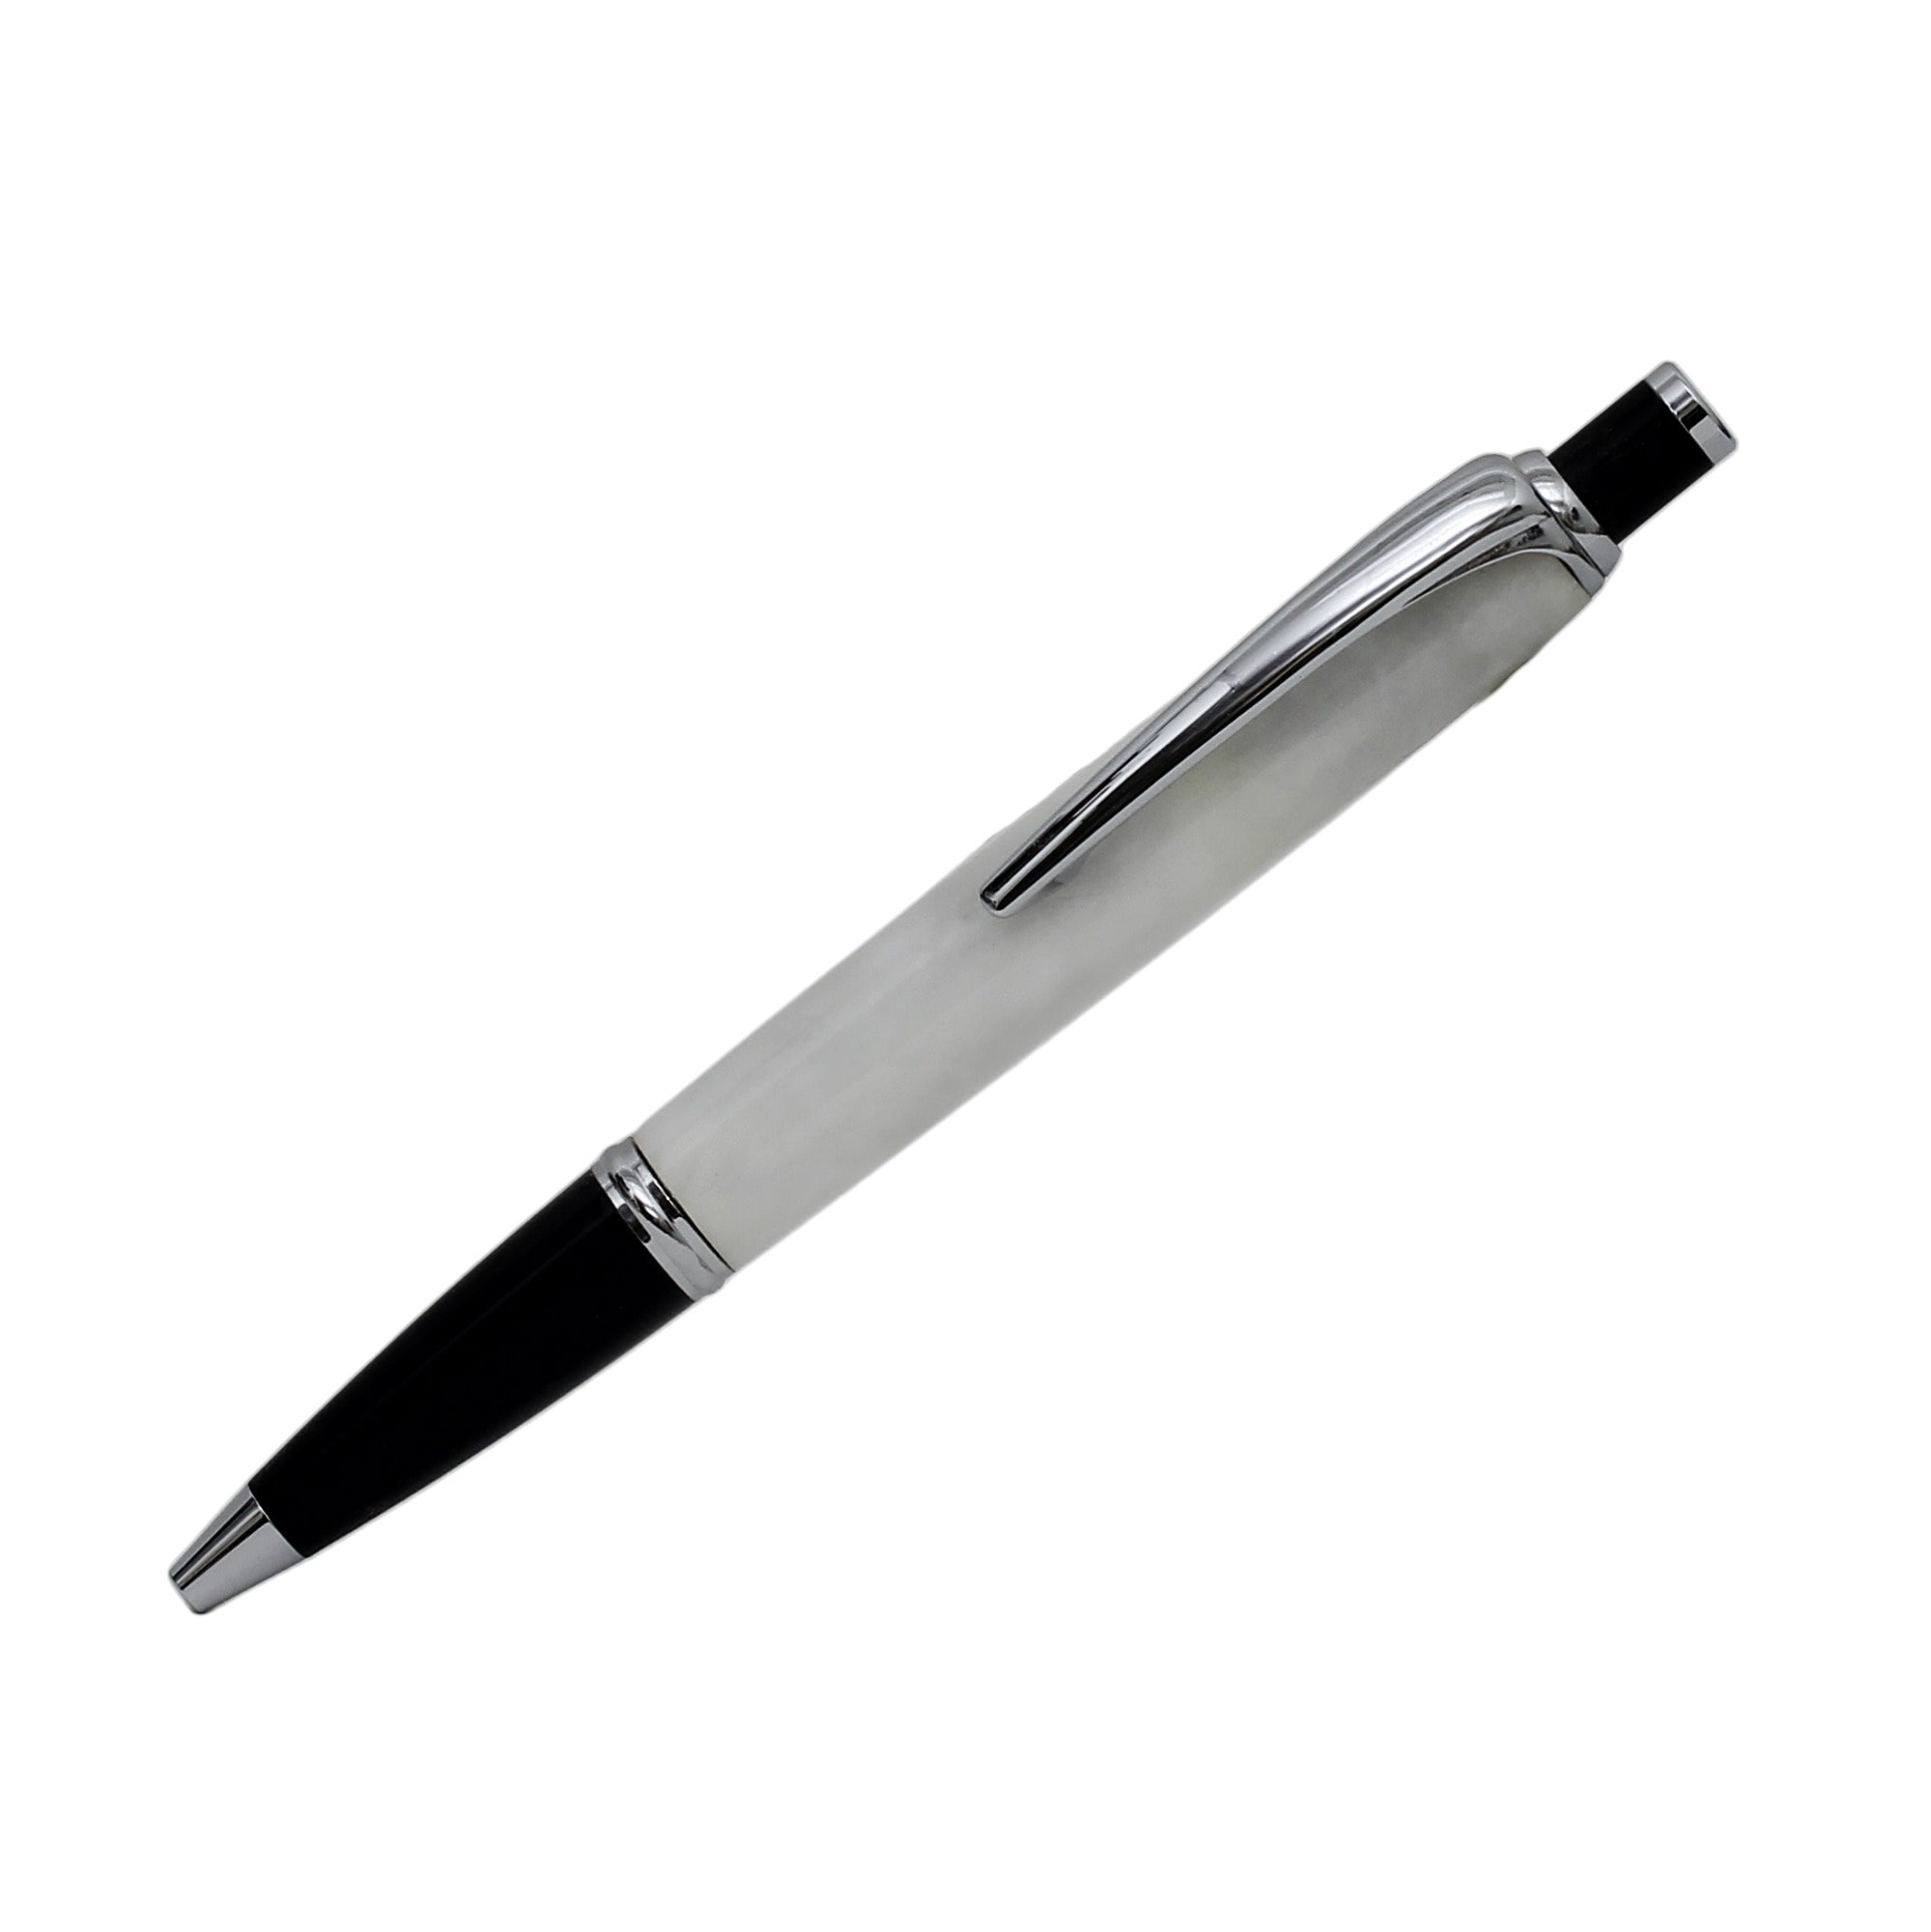 ART-PEN: Handcrafted Luxury Click Pen - Chrome finish with WHITE acrylic hand turned body - Artistica.com